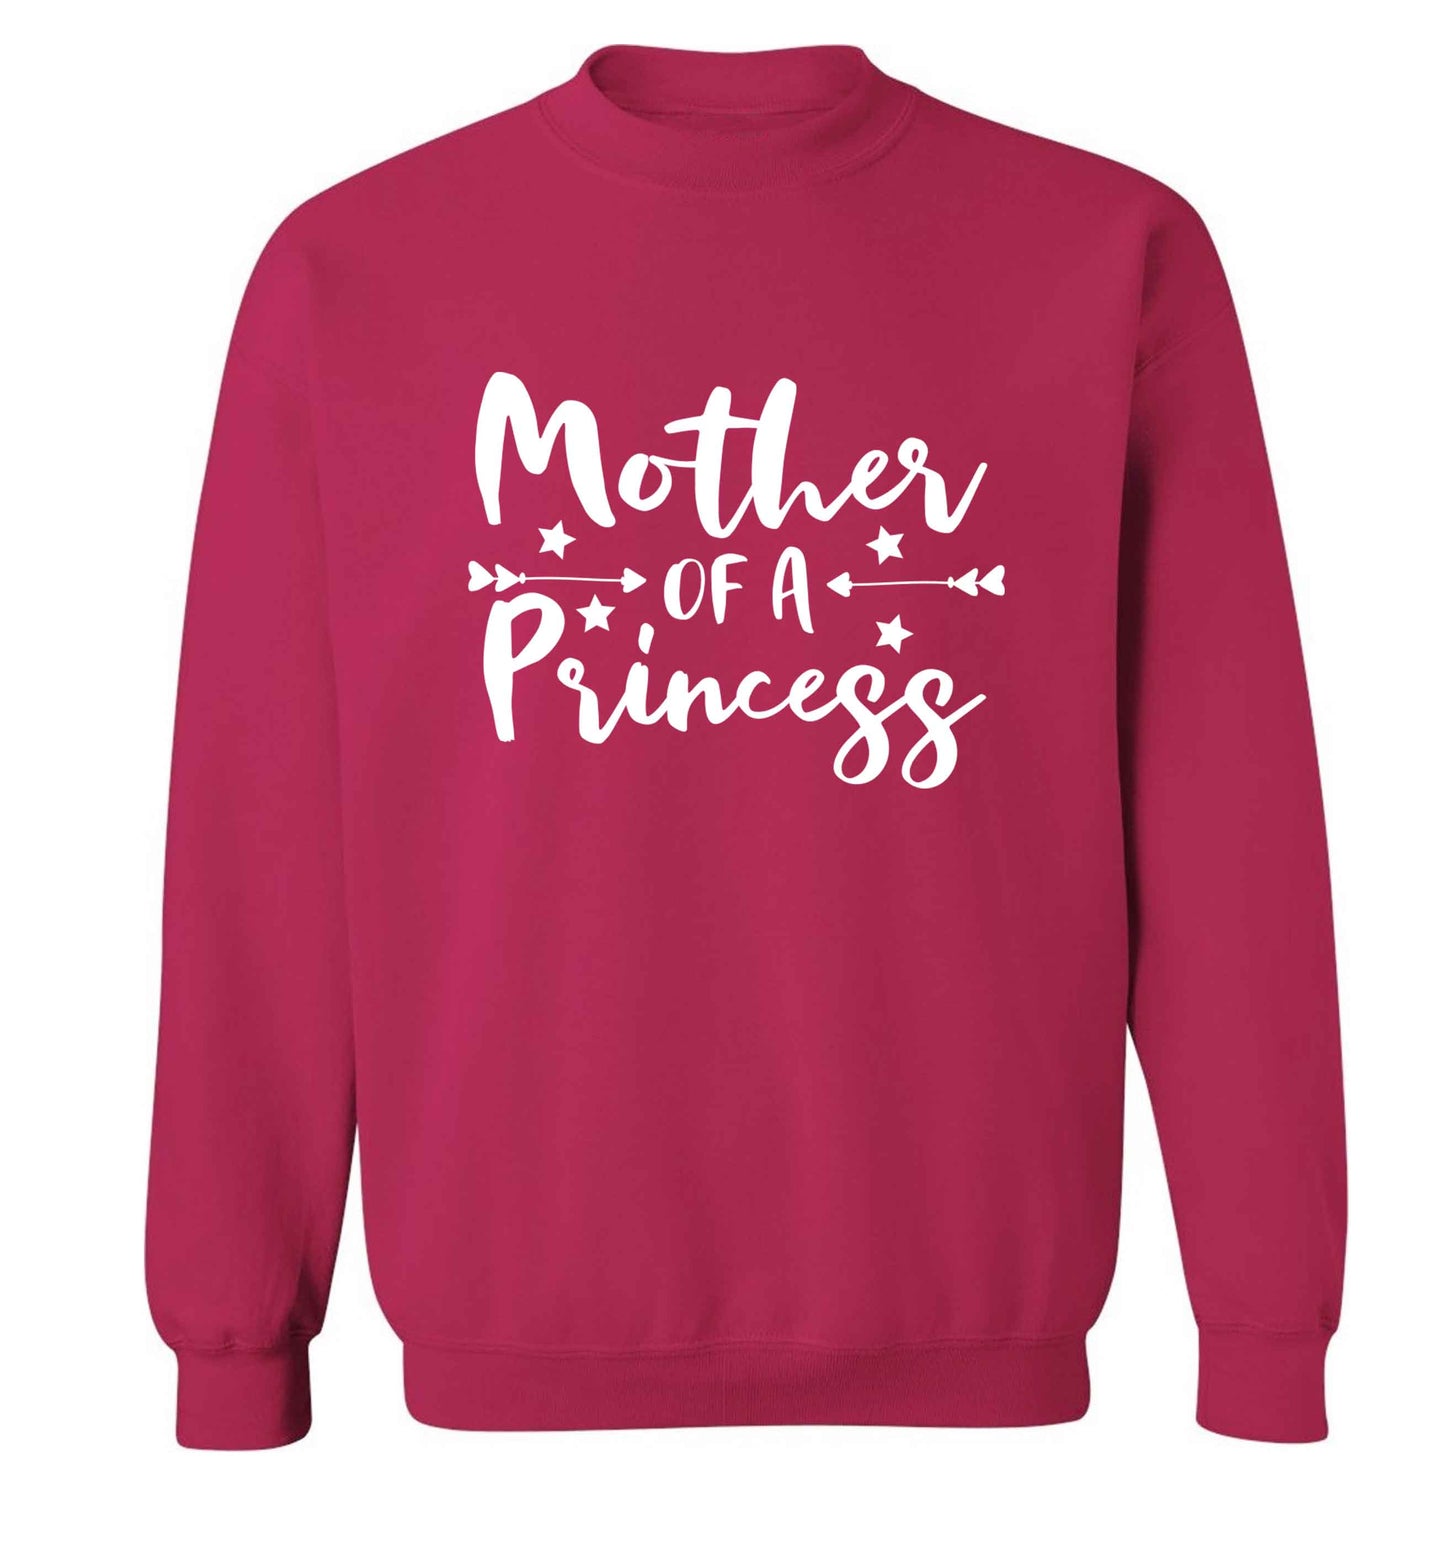 Mother of a princess adult's unisex pink sweater 2XL